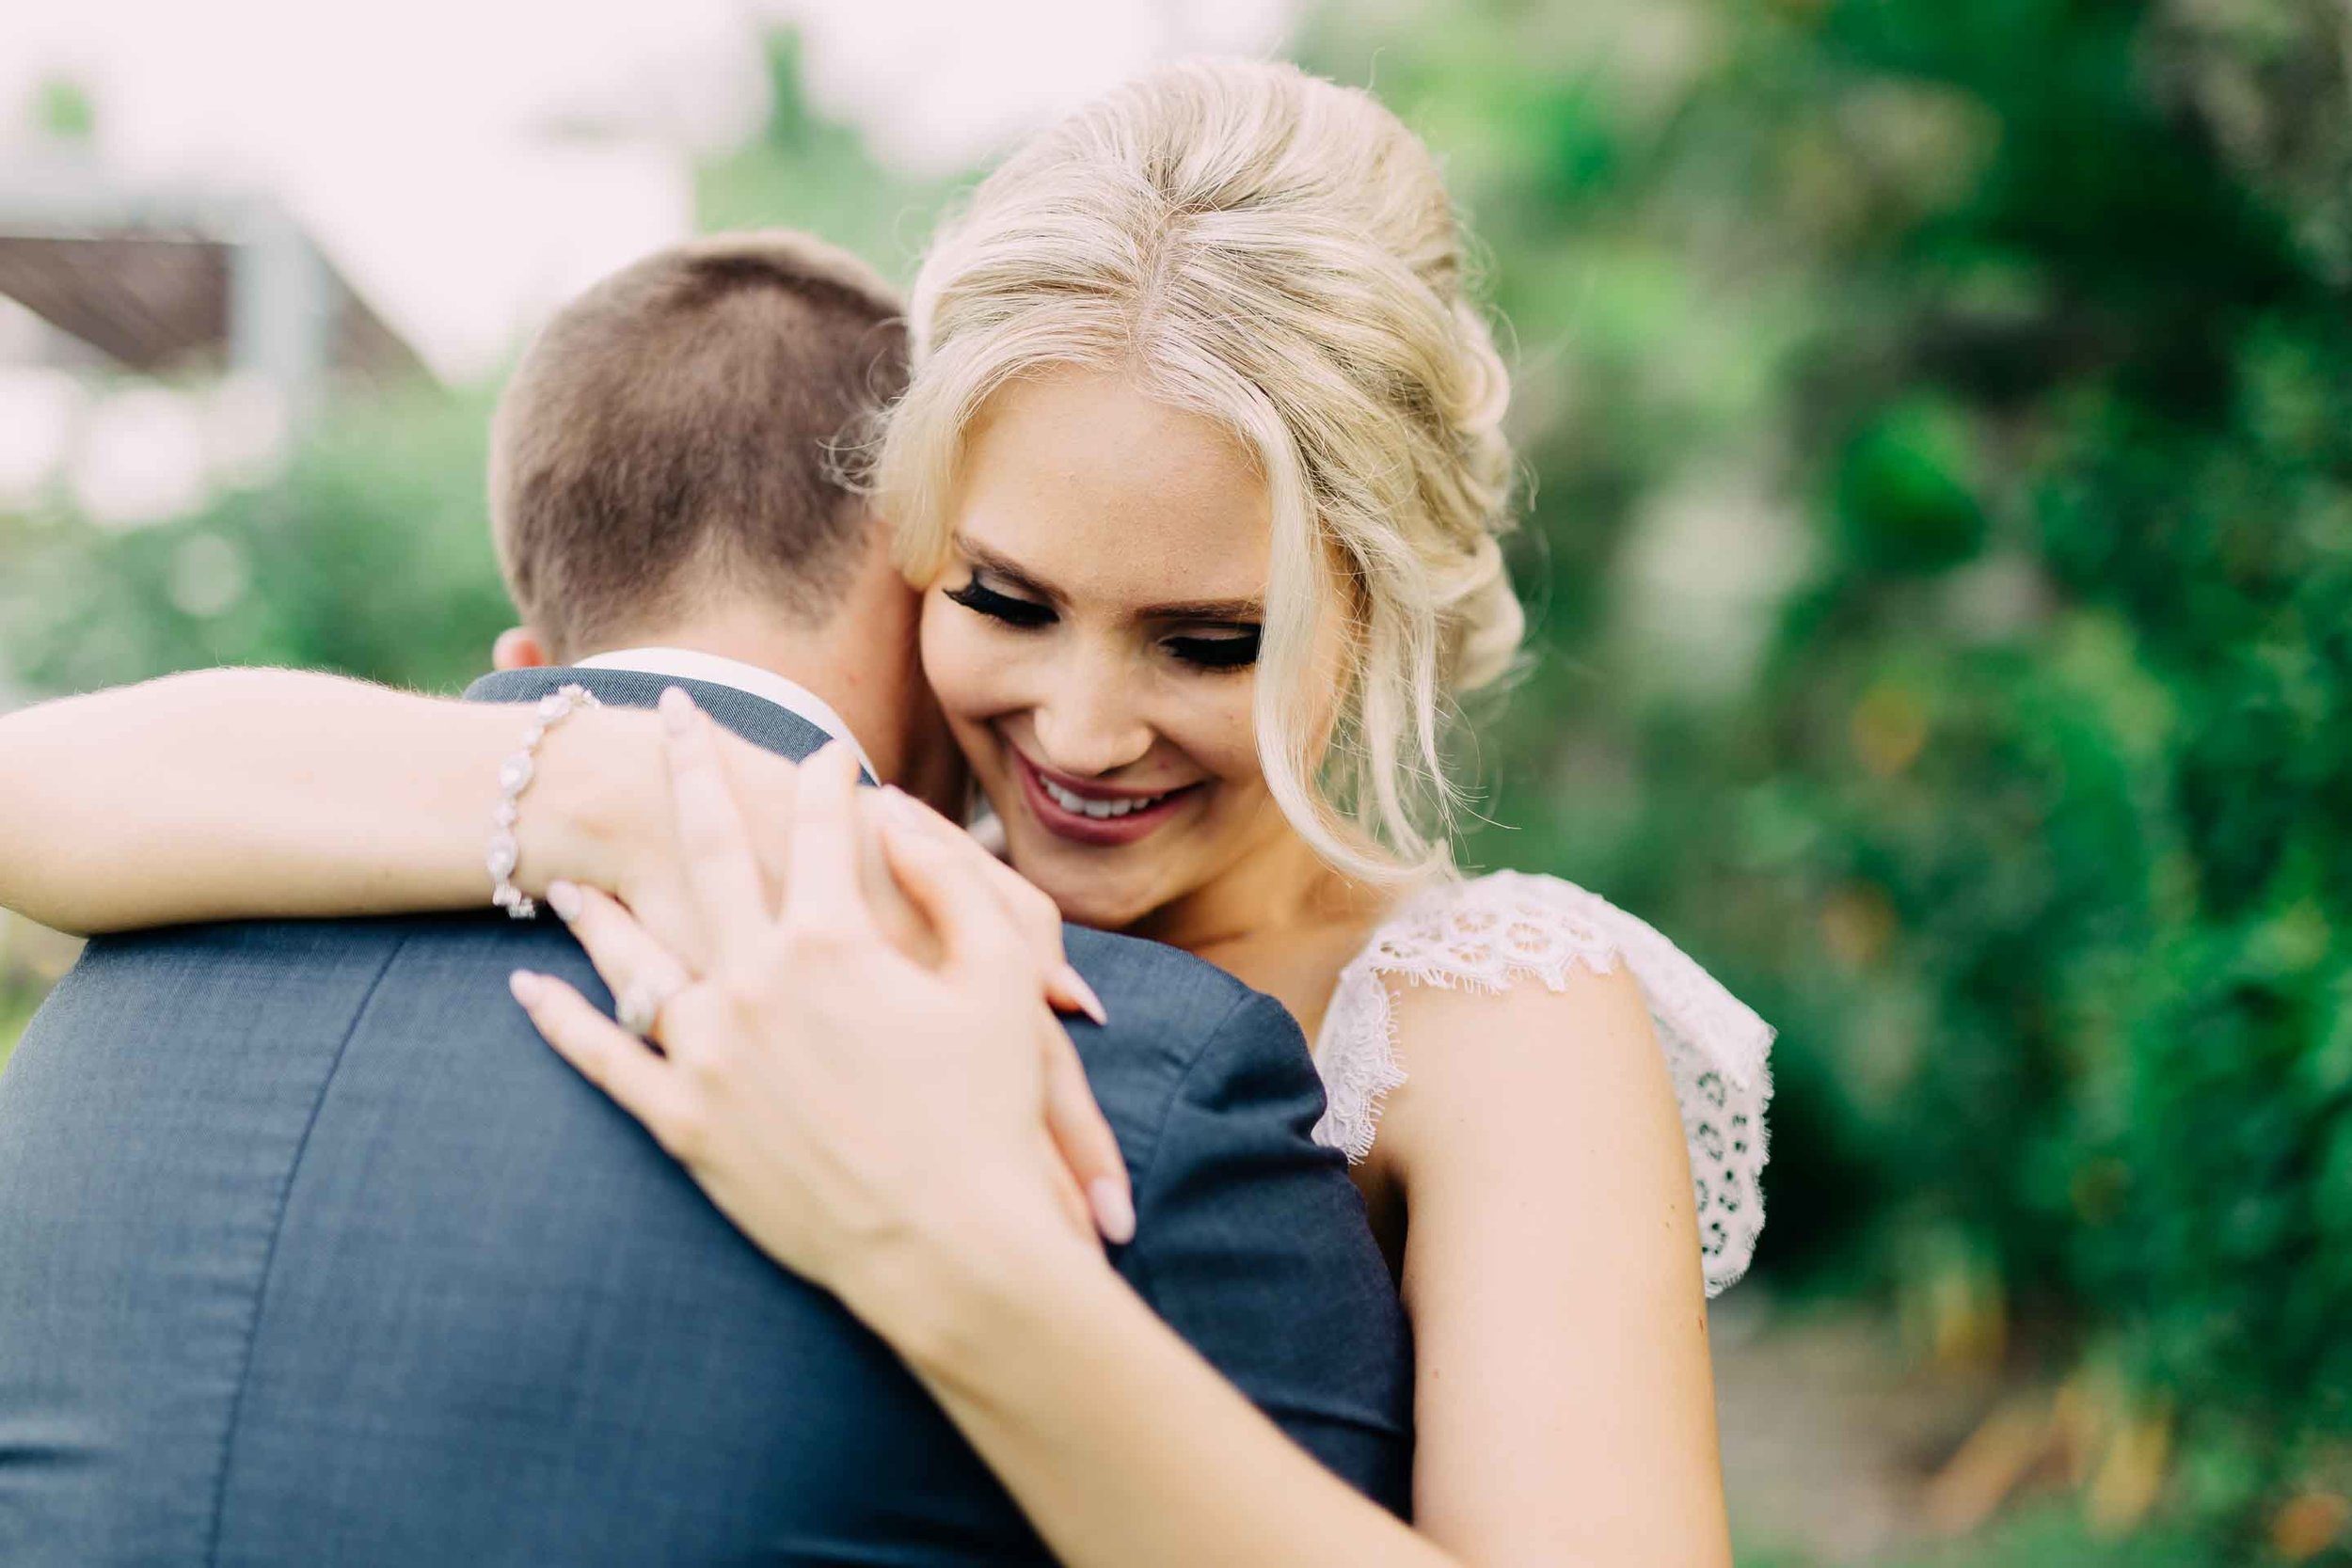 A cute moment between the newlyweds smily bride embraces her new husband.